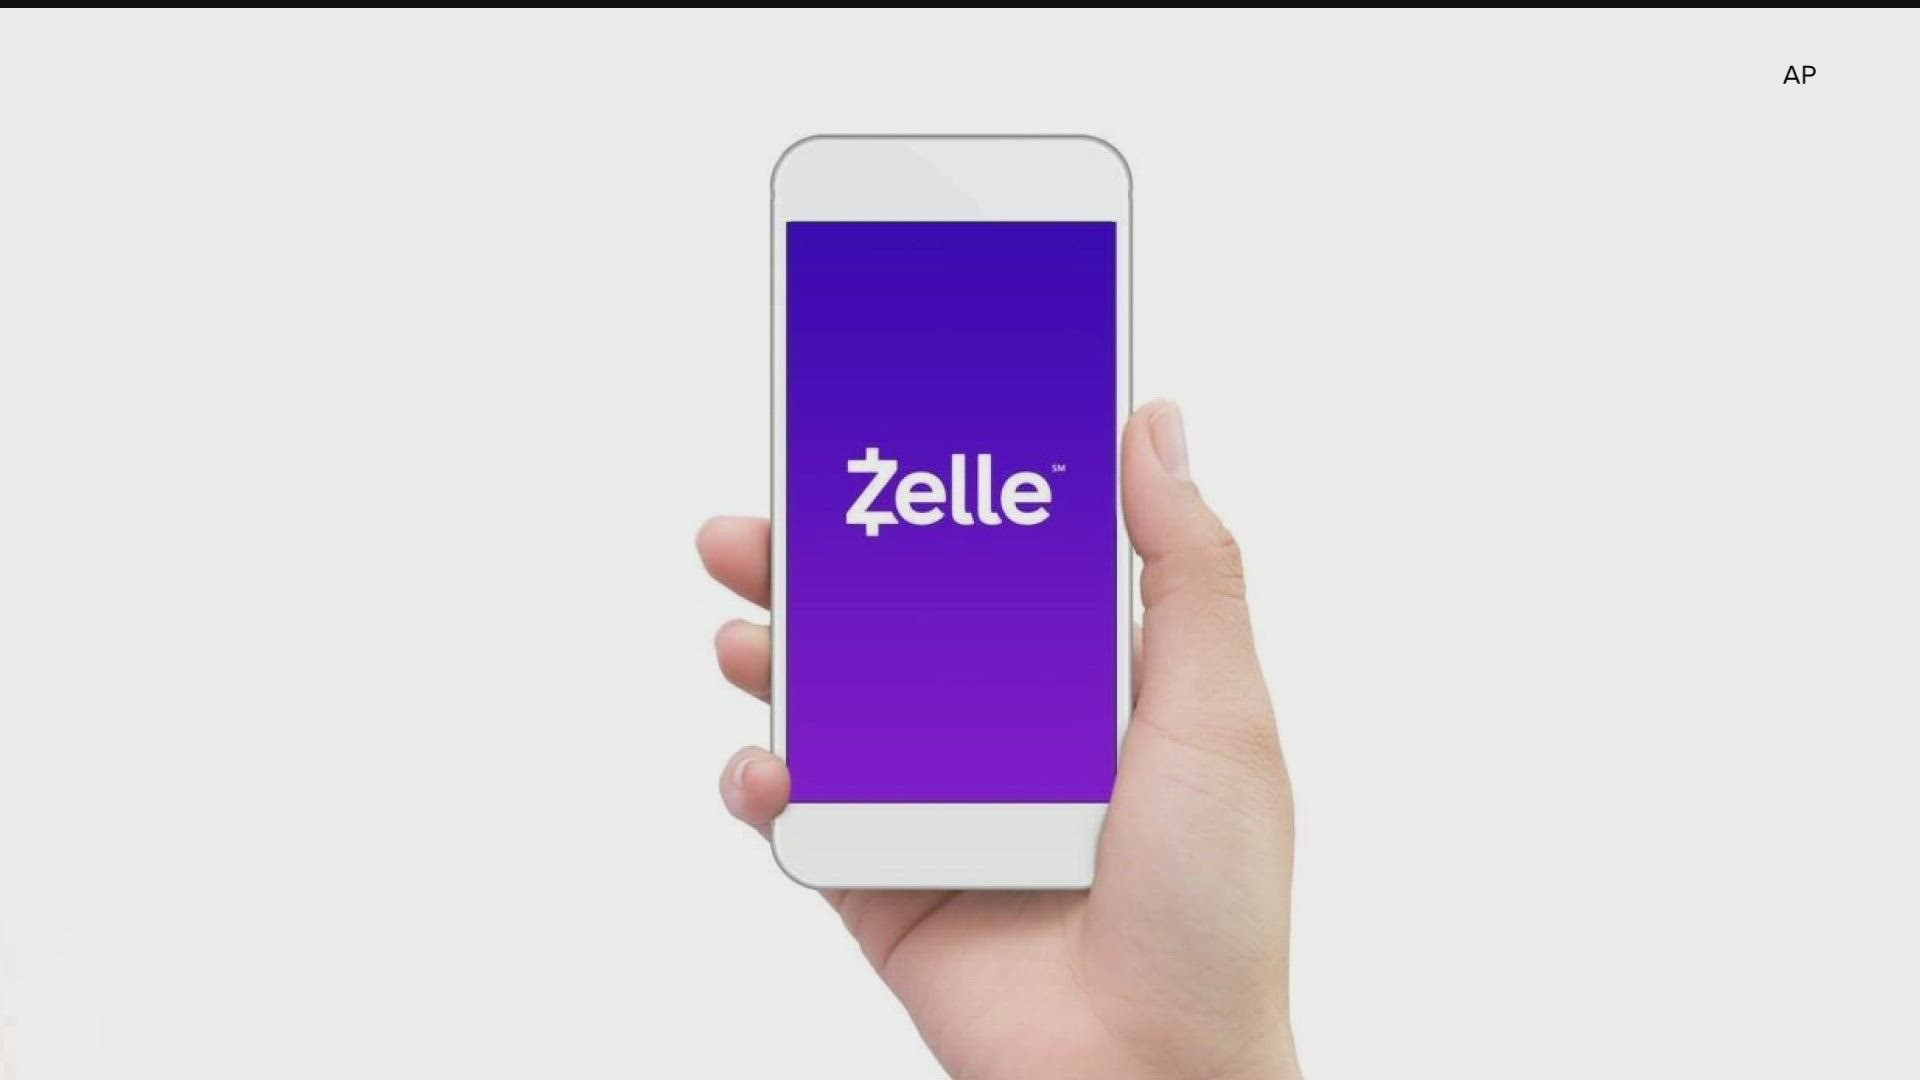 Digital payment apps like Zelle are convenient options for sending money, but do they come with a cost?